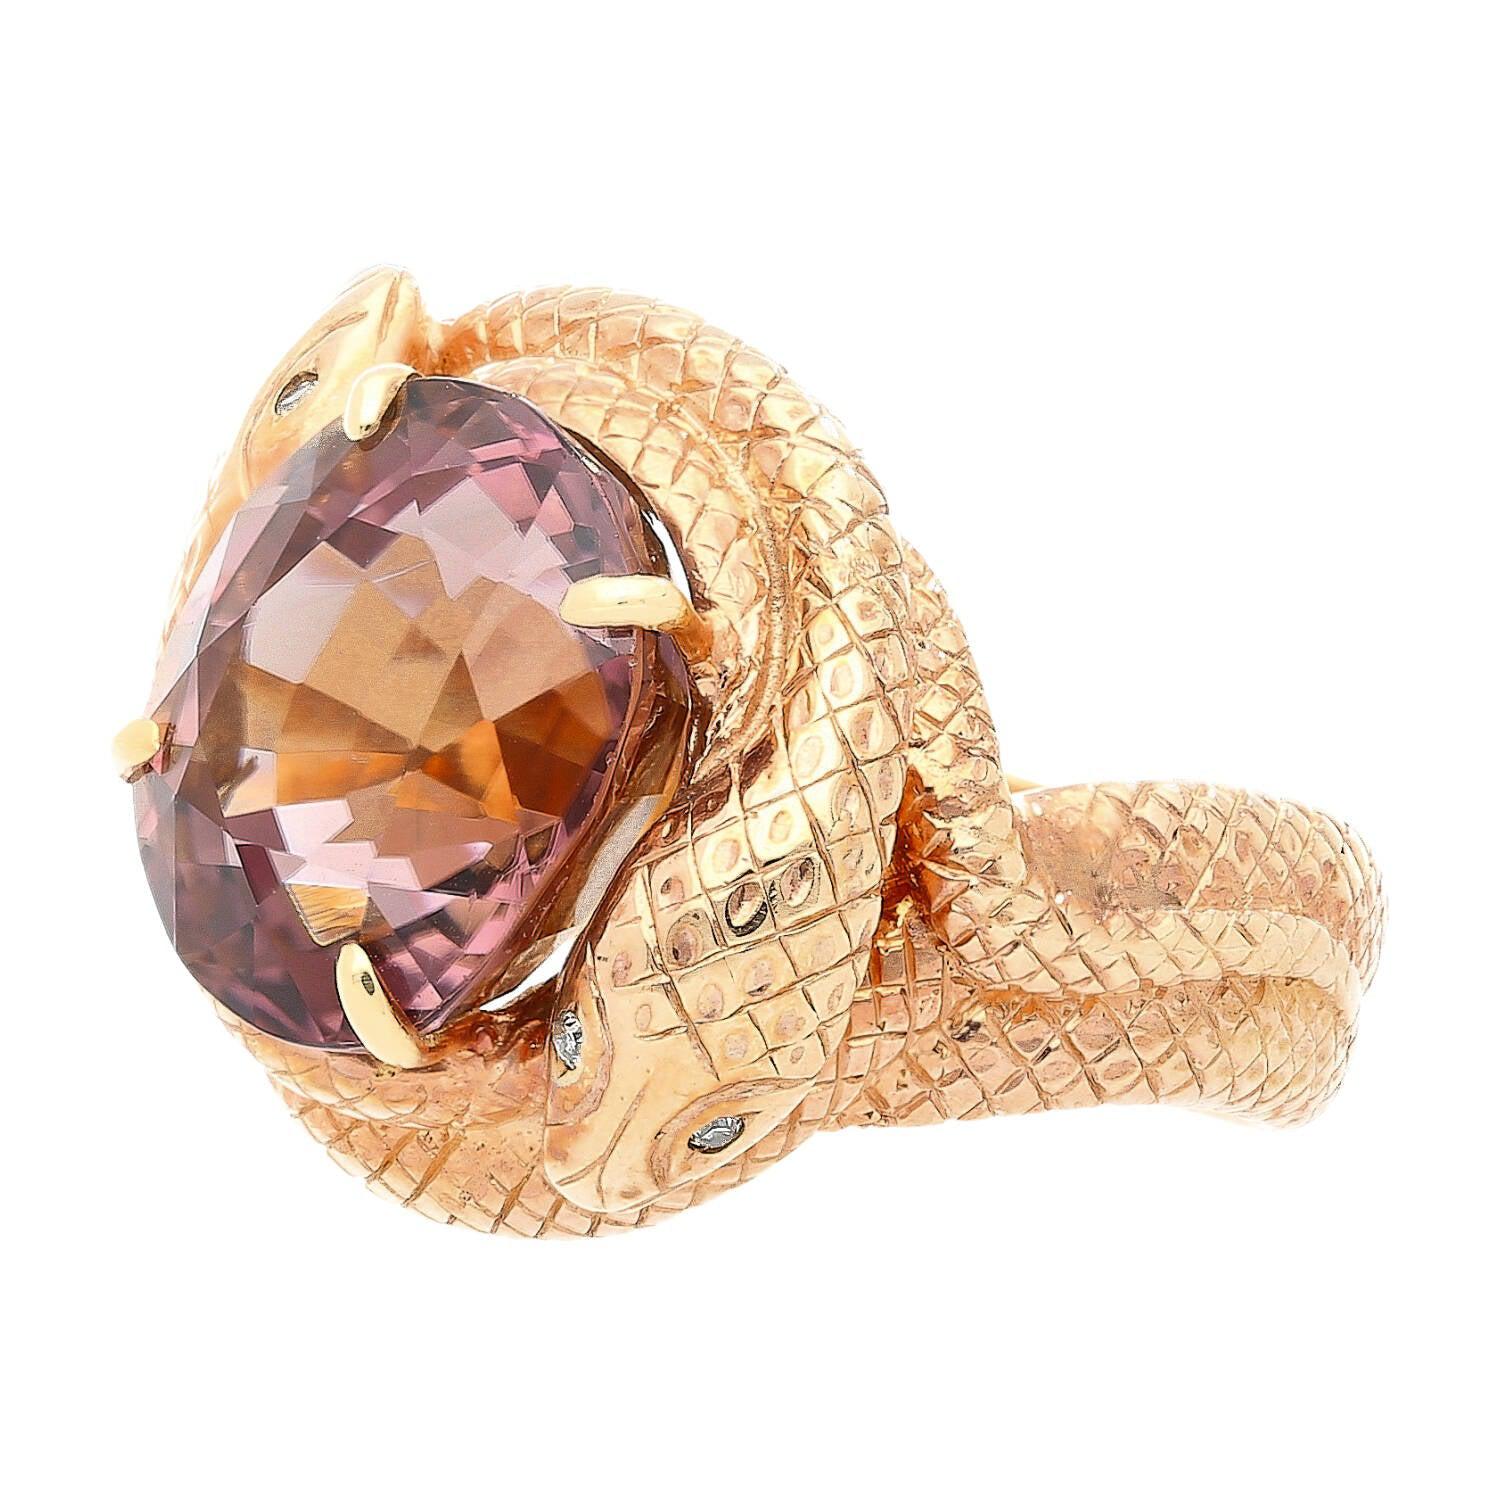 14K-Solid-Gold-Wrapping-Serpentine-Snake-Ring-With-10-Carat-Pink-Tourmaline-Semi-Precious-Jewelry-2.jpg